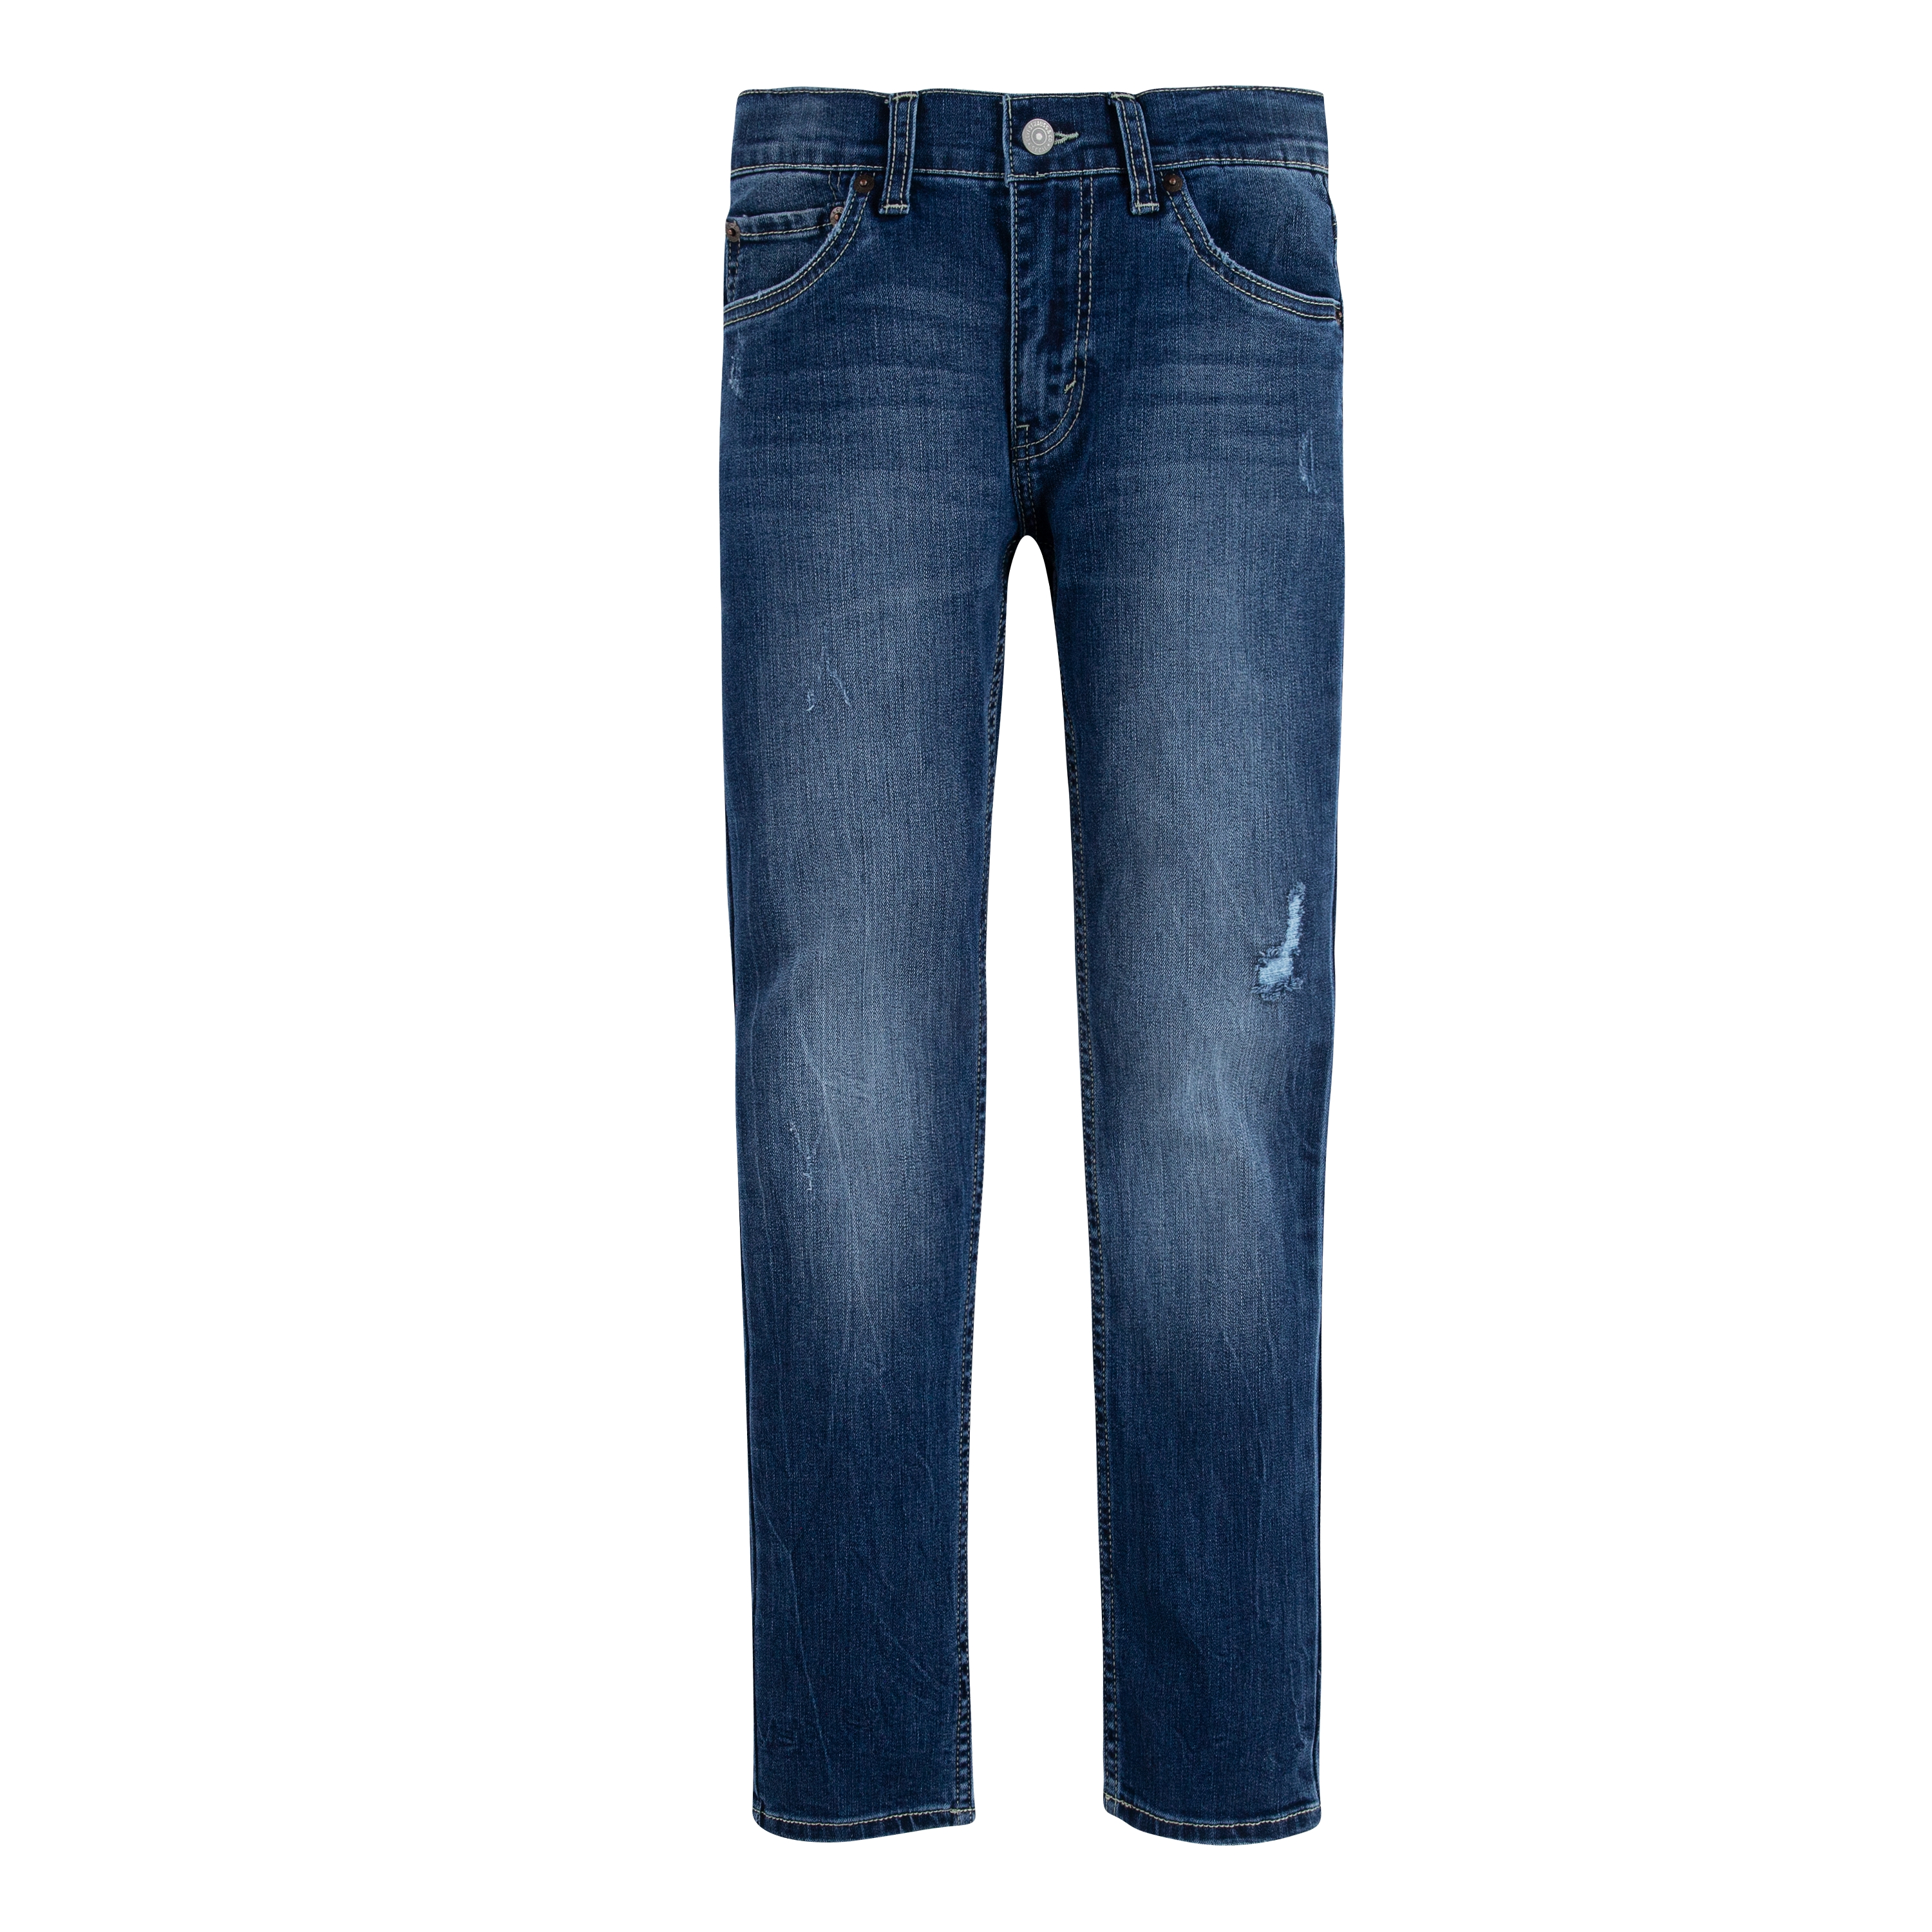 Levi's Boys' 510 Skinny Fit Performance Jeans, Sizes 4-20 - image 1 of 9